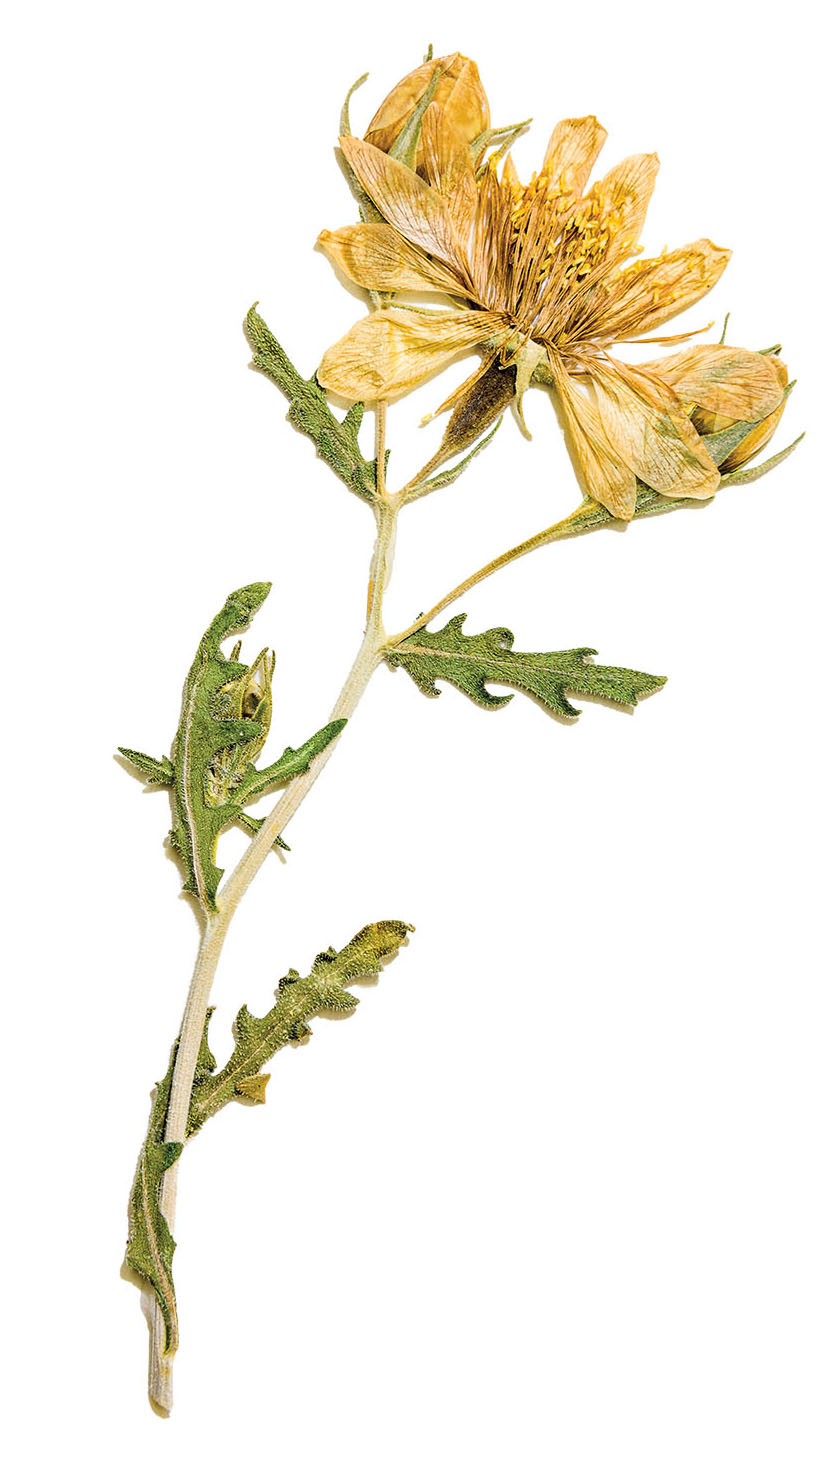 A yellow flower with a long stem and green leaves on a white background